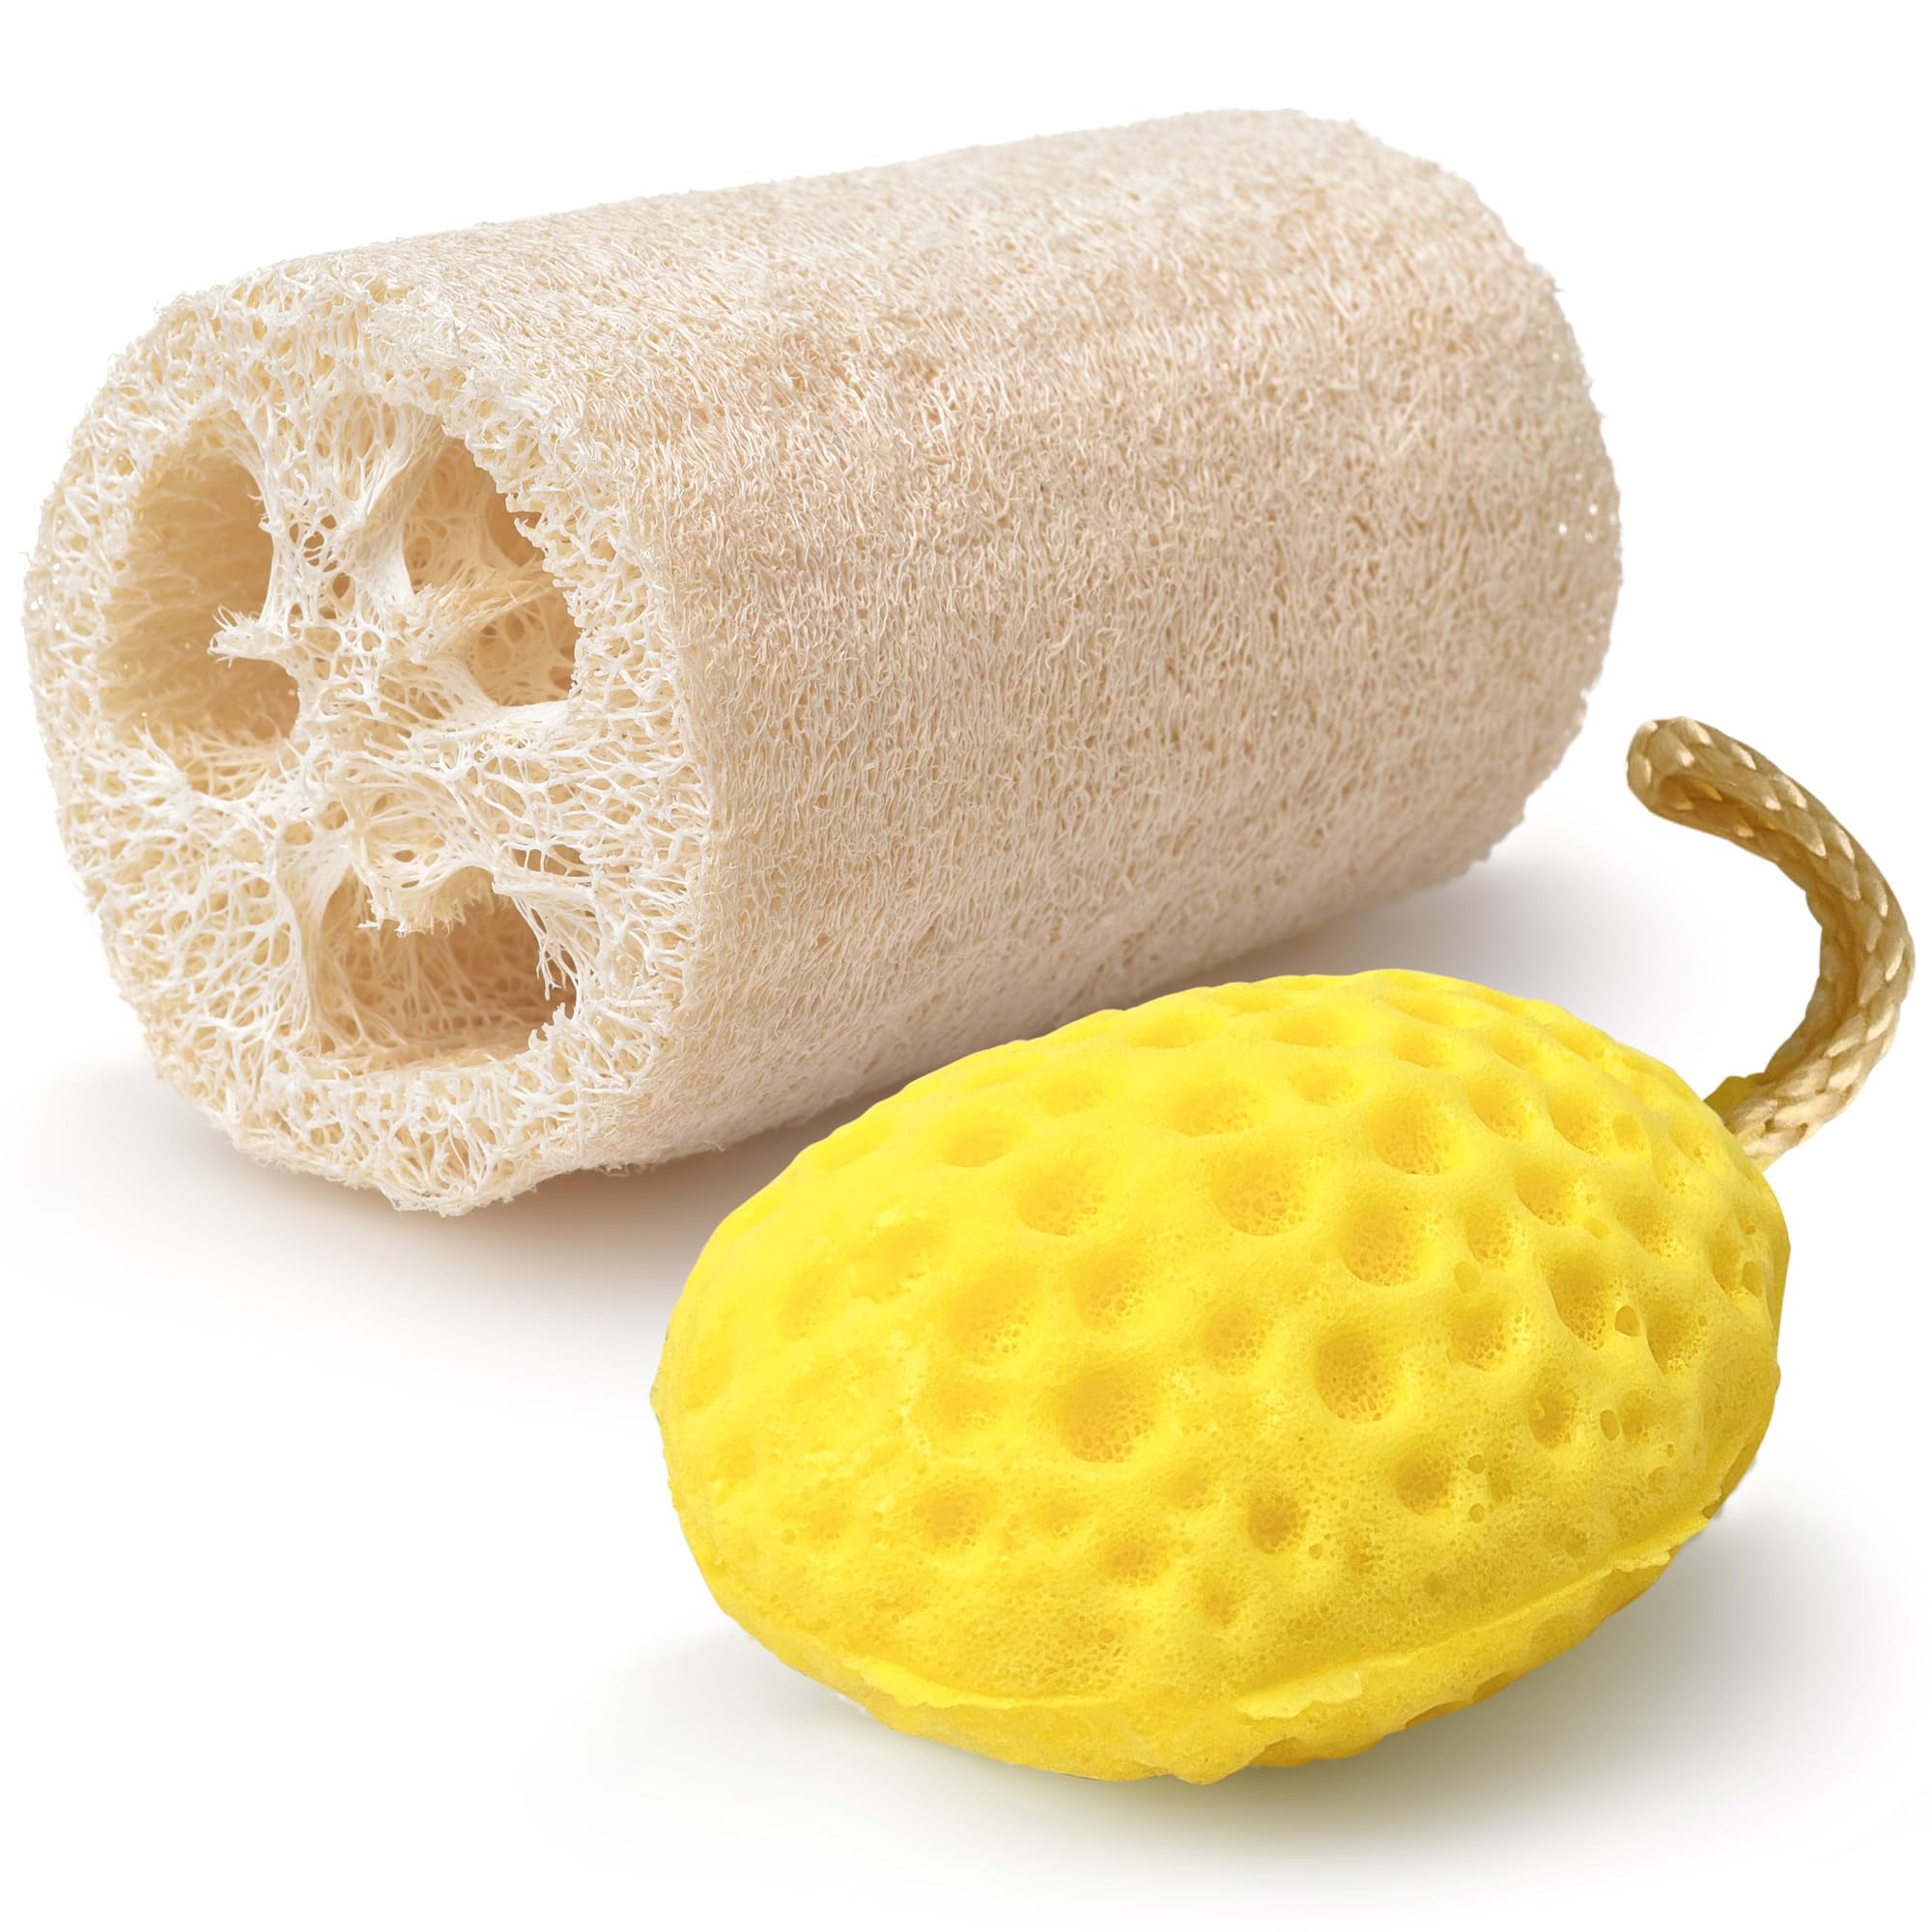 Serenelife Loofah and Sponge - Exfoliating Scrubber for Body Care in Bath Spa Shower, Remove Dead Skin, Great for Bathing and Scrubbing, Bathroom Necessity for Men and Women